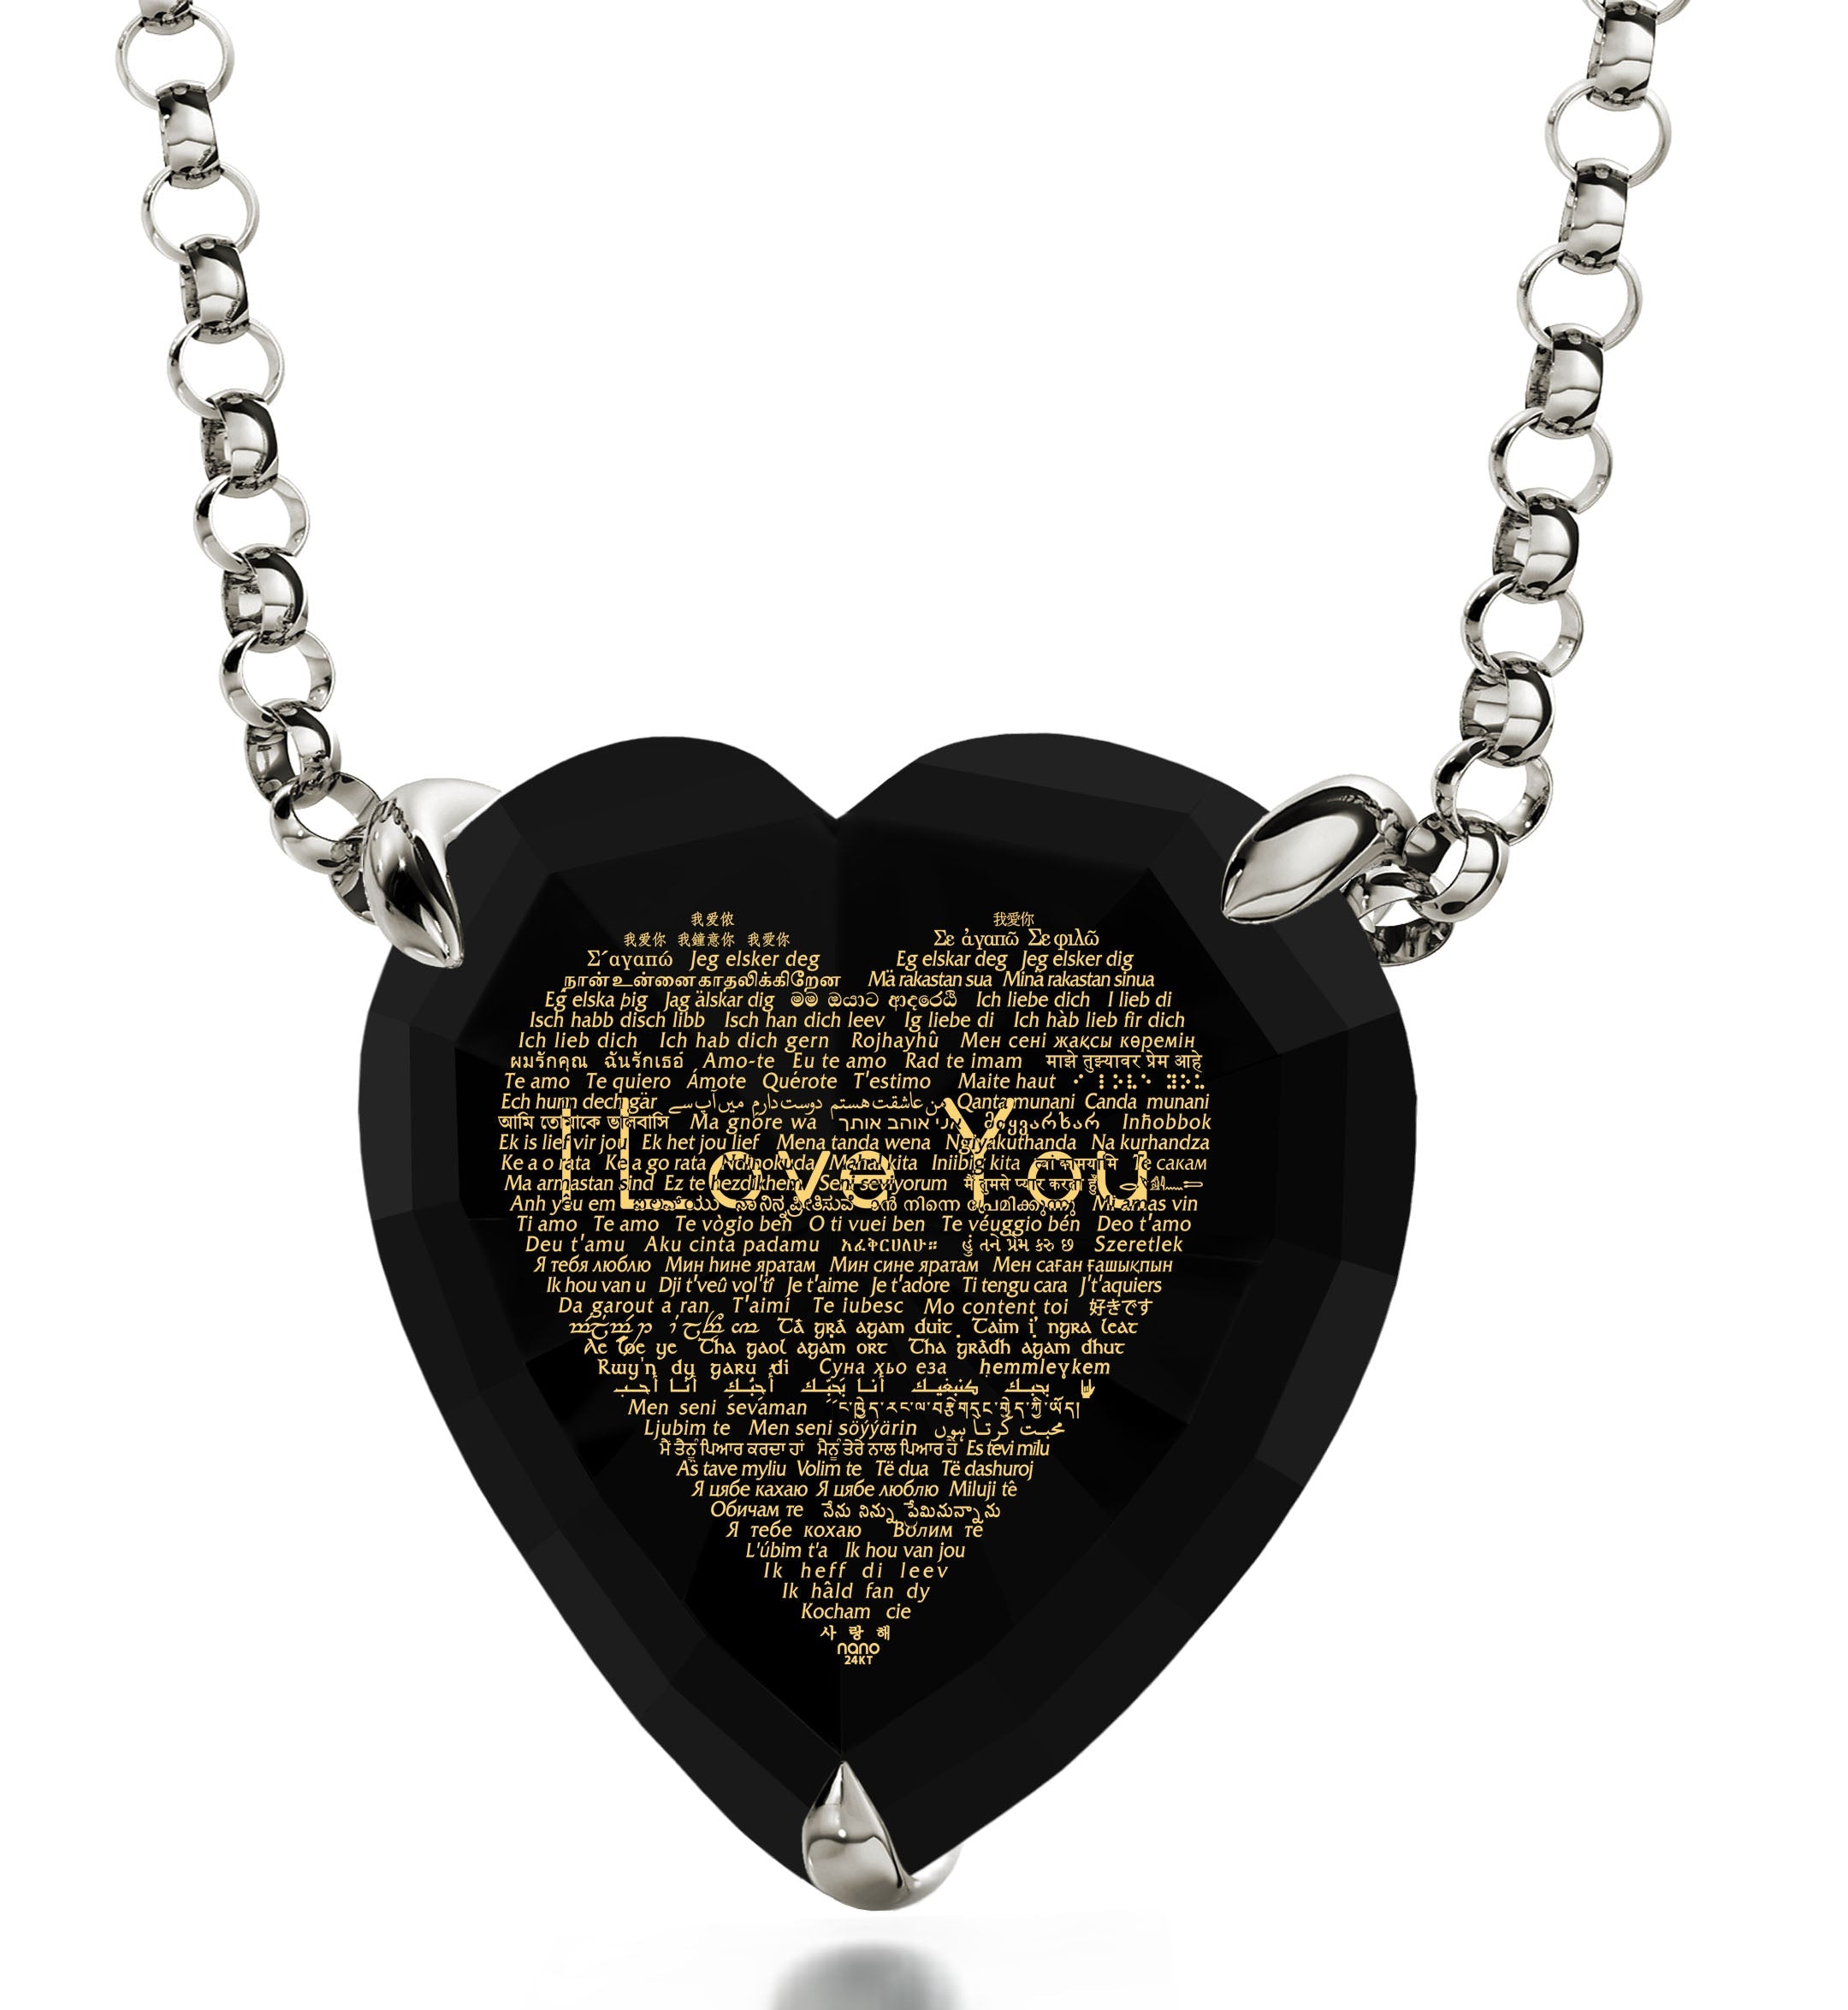 A large, shiny red 925 Sterling Silver Heart Necklace with two metallic chains linked through its top, overlaid with I Love You in 120 Languages in a reflective script.